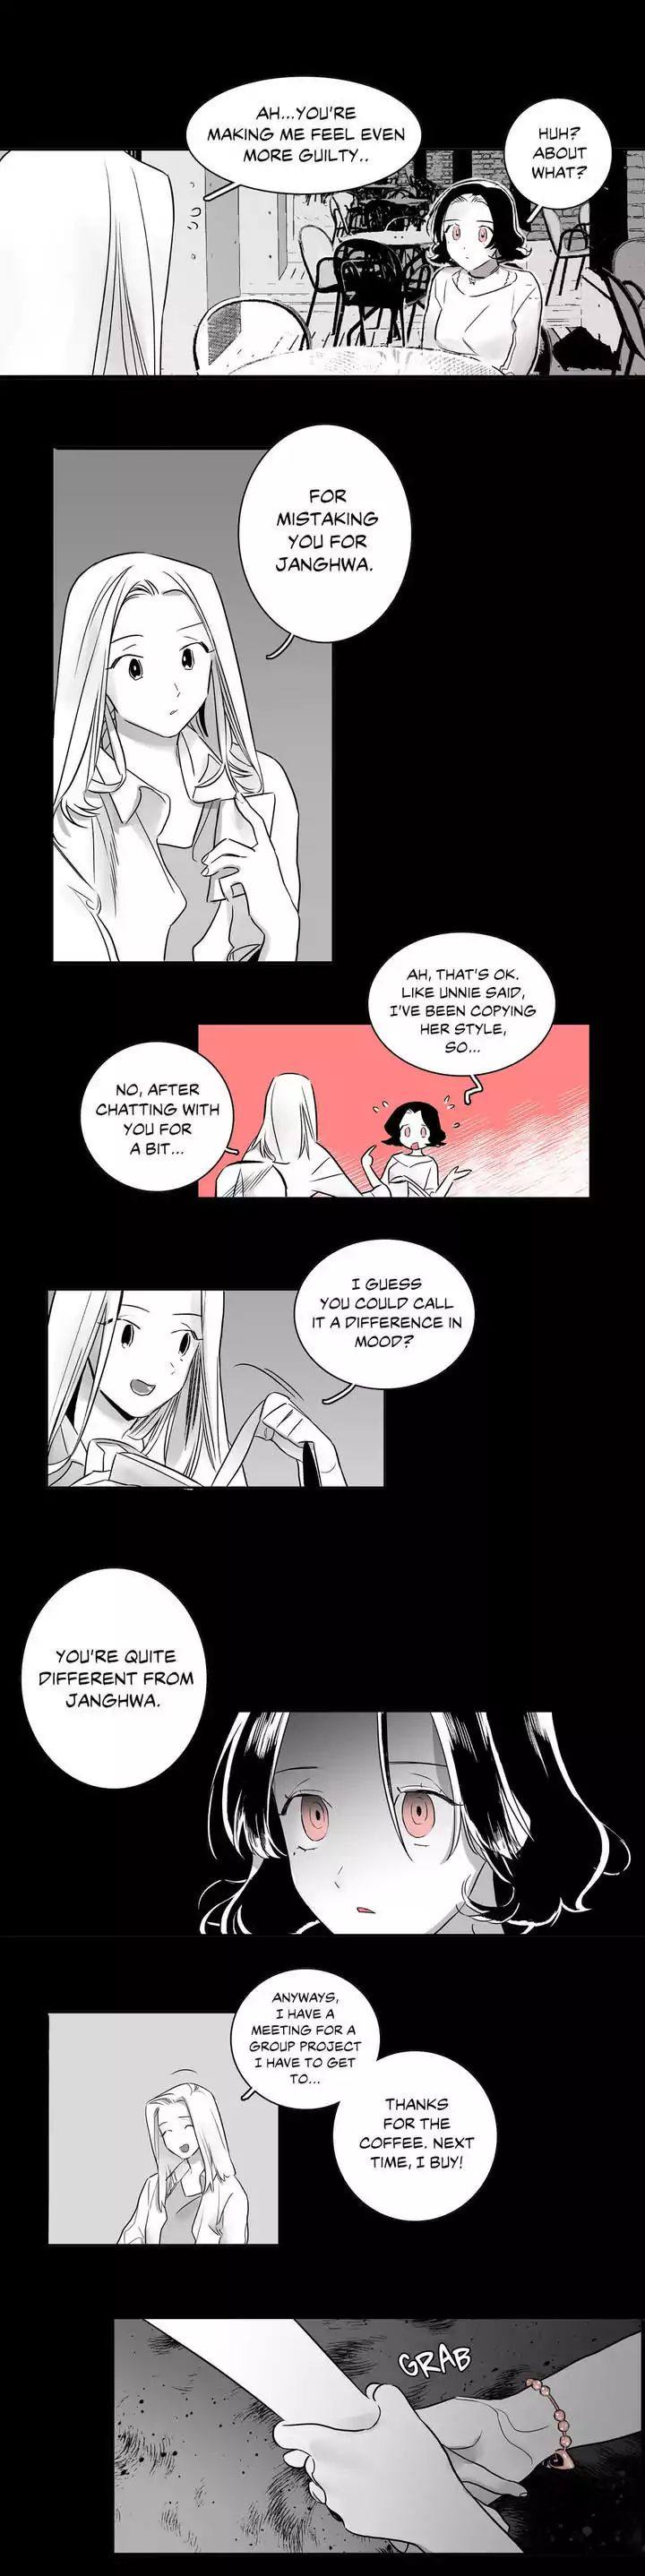 Vanishing Twin - Chapter 5 Page 4